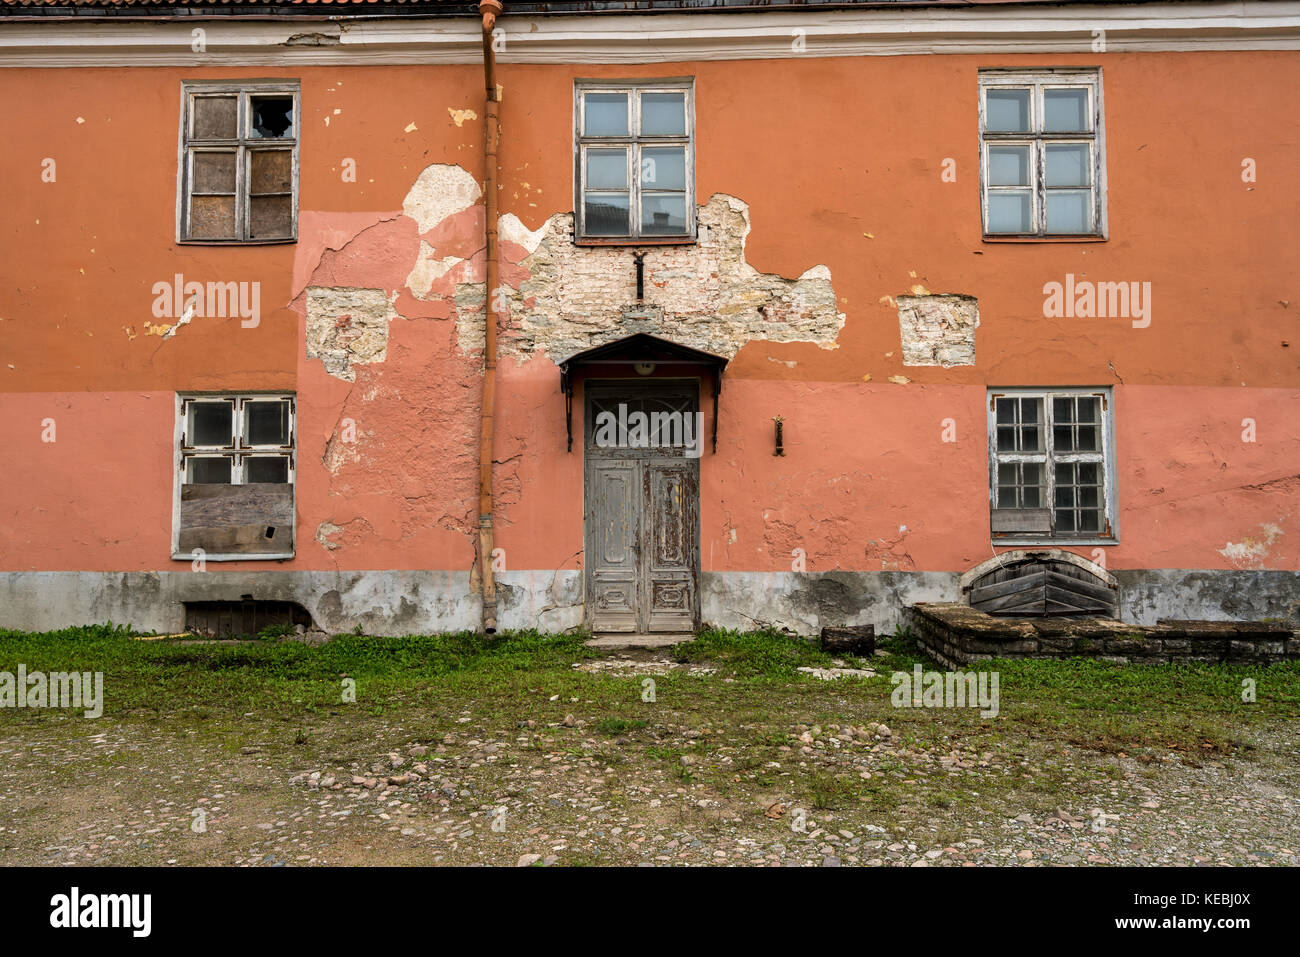 Ruined old home or house in Tallinn, Estonia Stock Photo